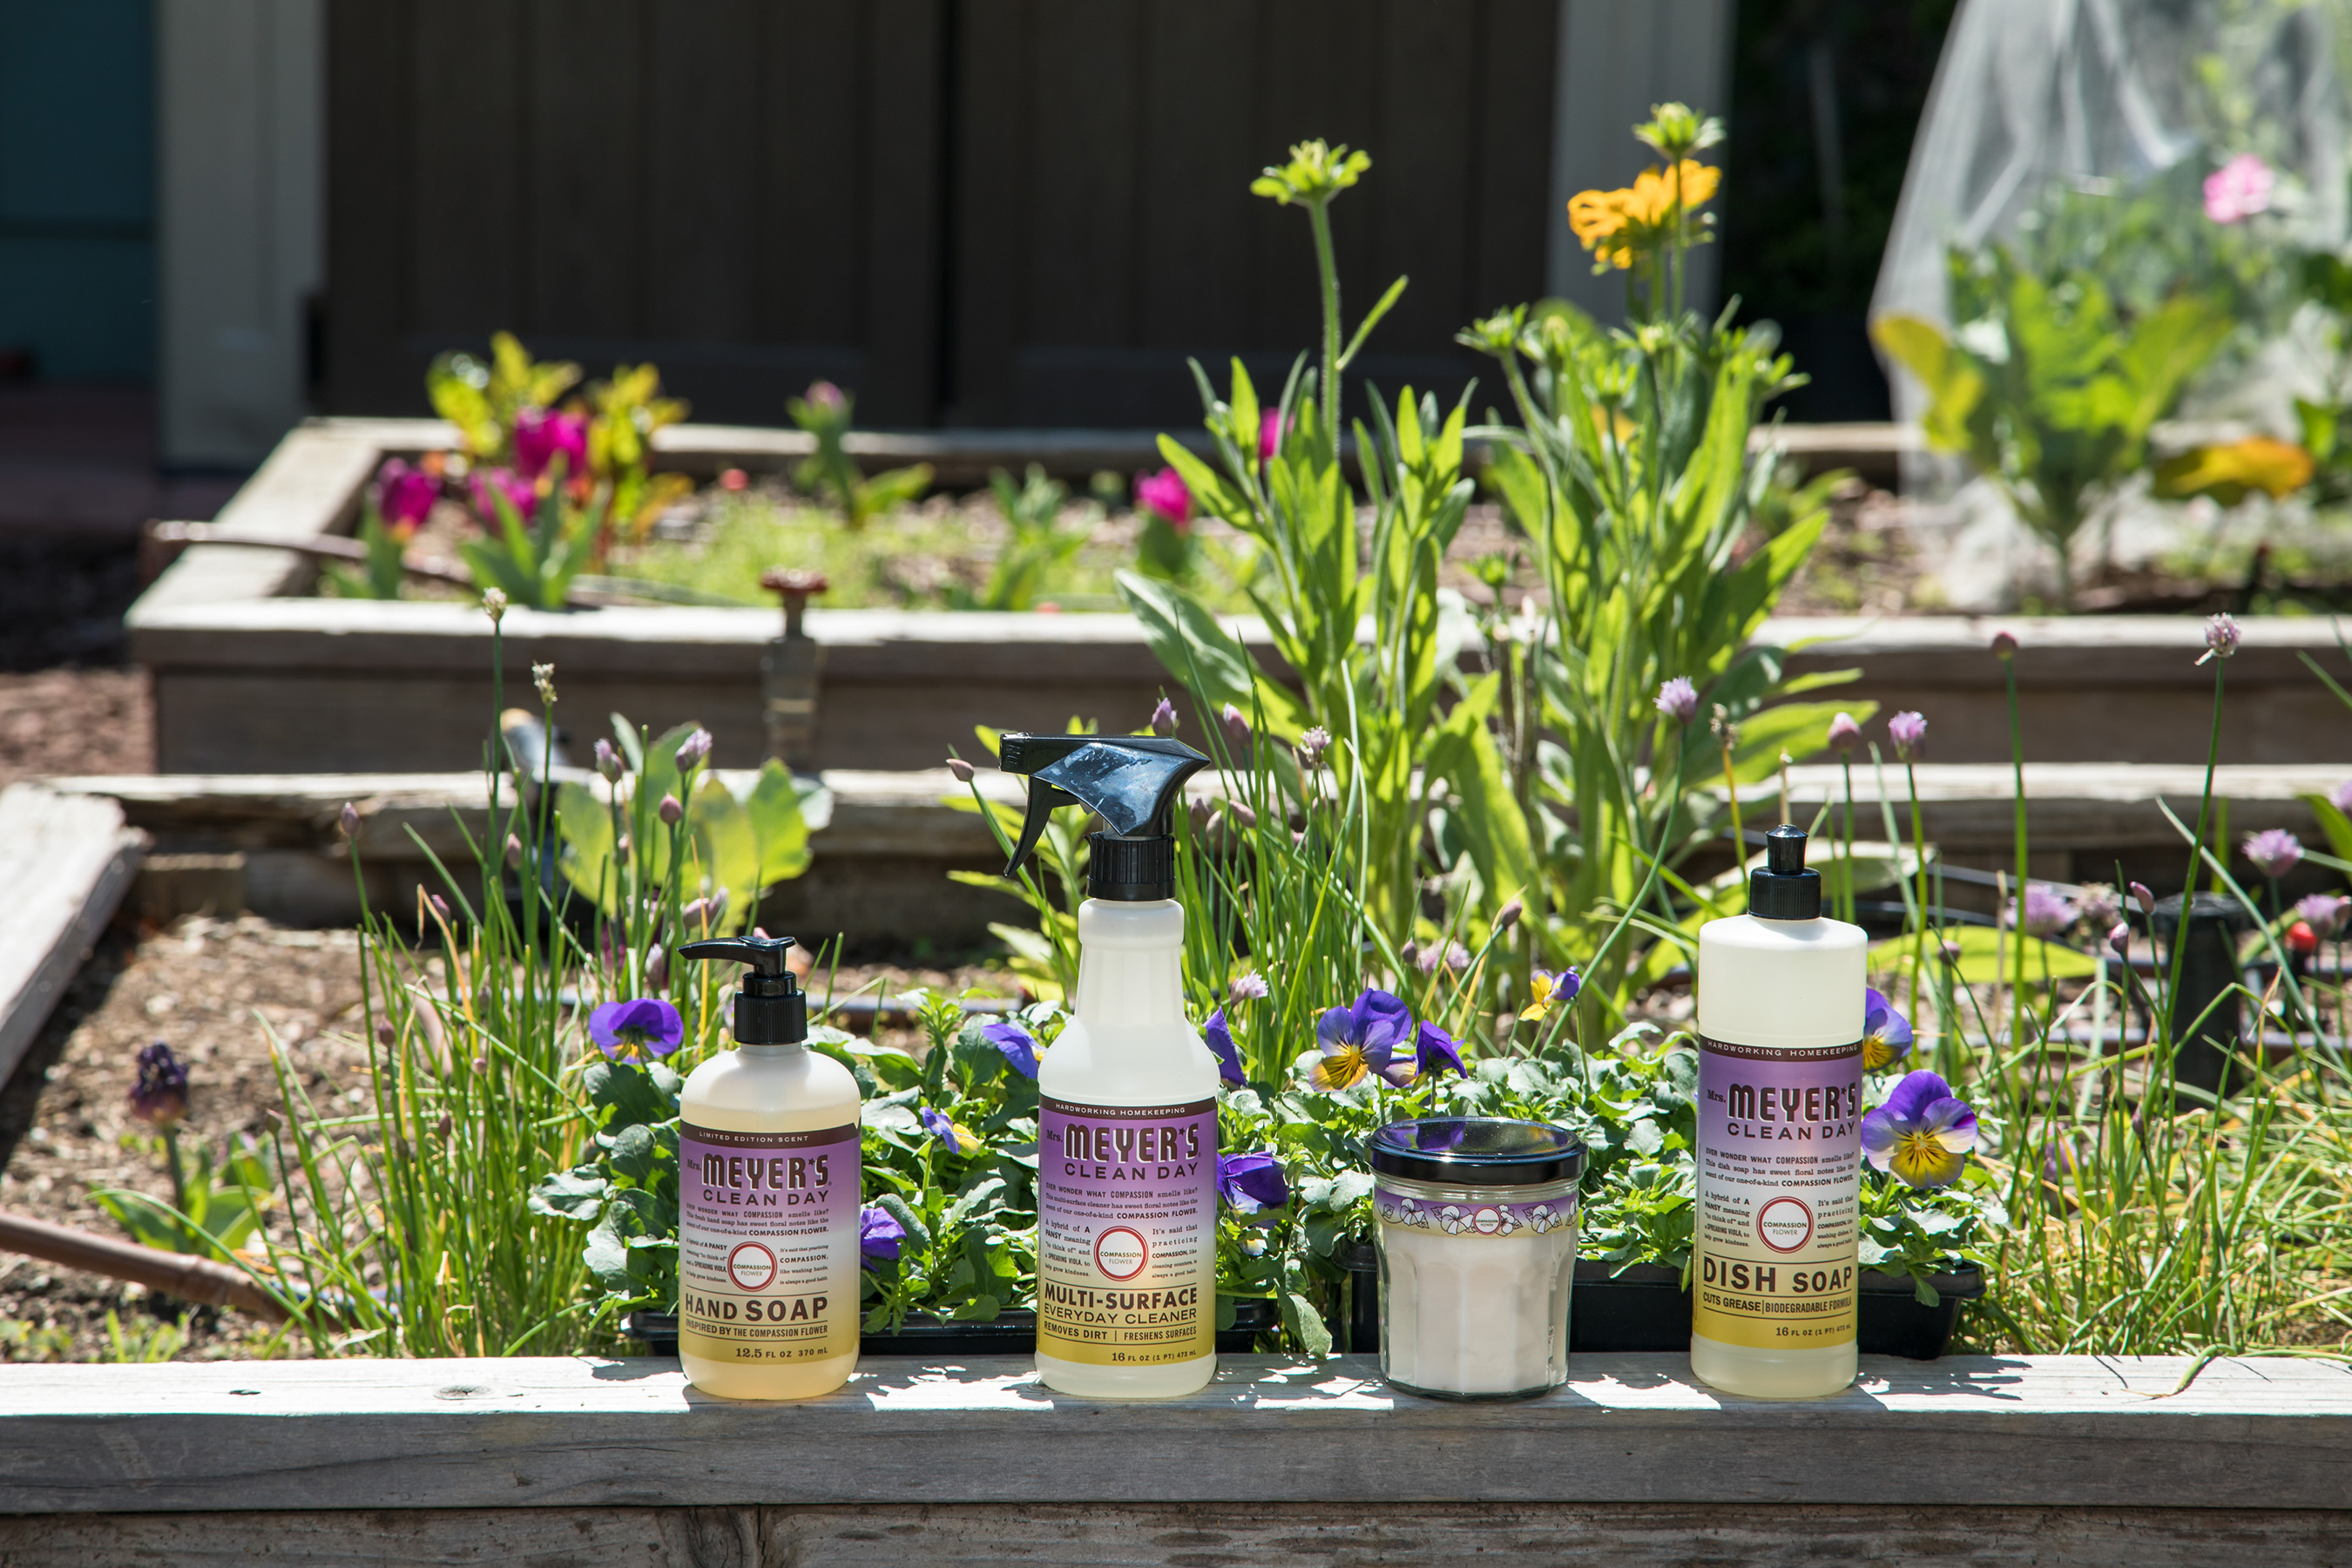 The Compassion Flower product line including the (from left to right) Hand Soap, Multi-Surface Everyday Cleaner, Large Soy Candle, and Dish Soap. Consumers can support the Lots of Compassion program by purchasing Mrs. Meyer’s Clean Day Compassion Flower products, with $1 from each product sold (up to $200K annually), benefitting community garden efforts throughout the country.